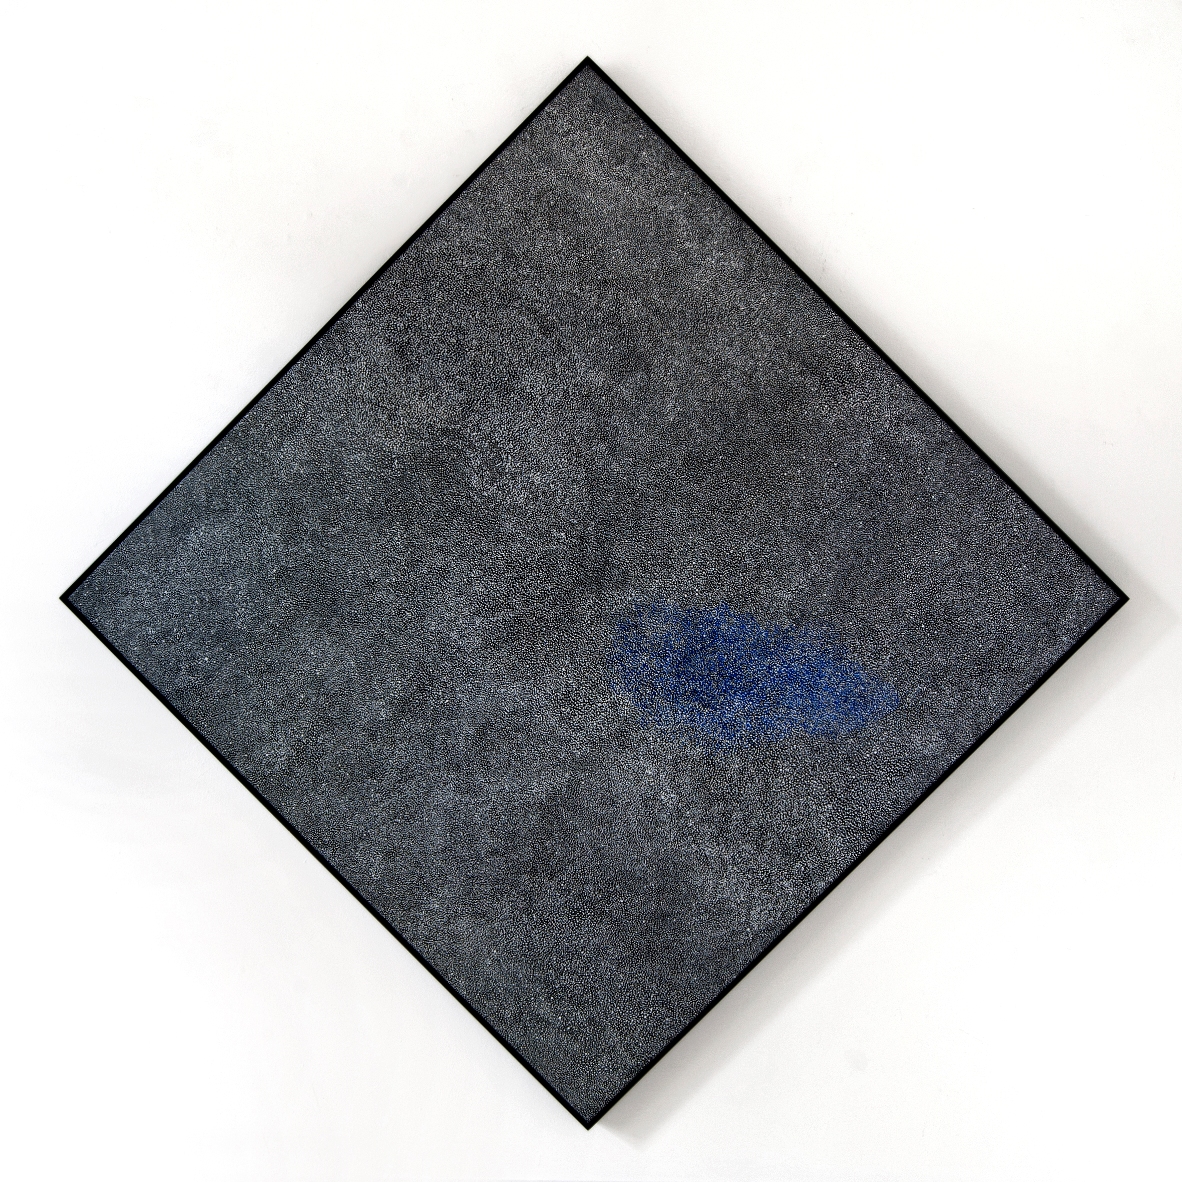 A framed square painting rotated 45 degrees so its corners point straight up, down, left and right. The painting is made up of fine white dots on a mostly black background, like a view of a starry night sky. 